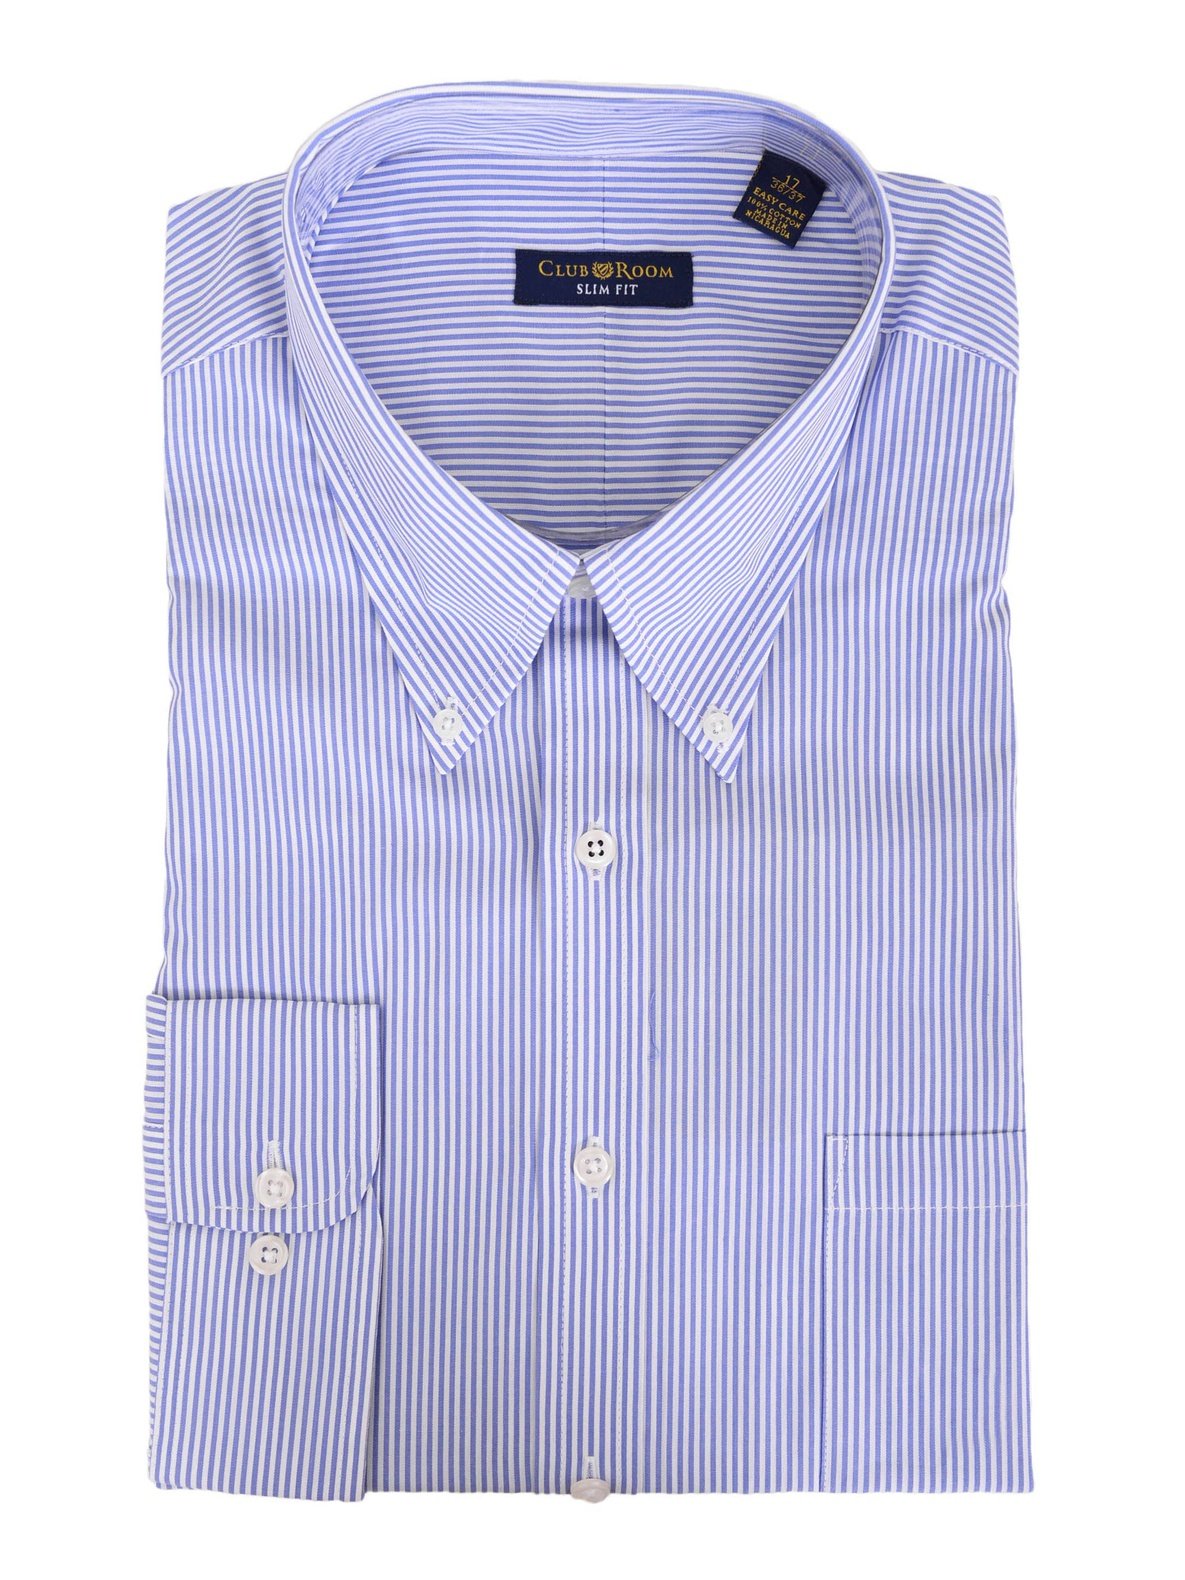 Club Room Slim Fit Blue Striped Button Down Collar Easy Care